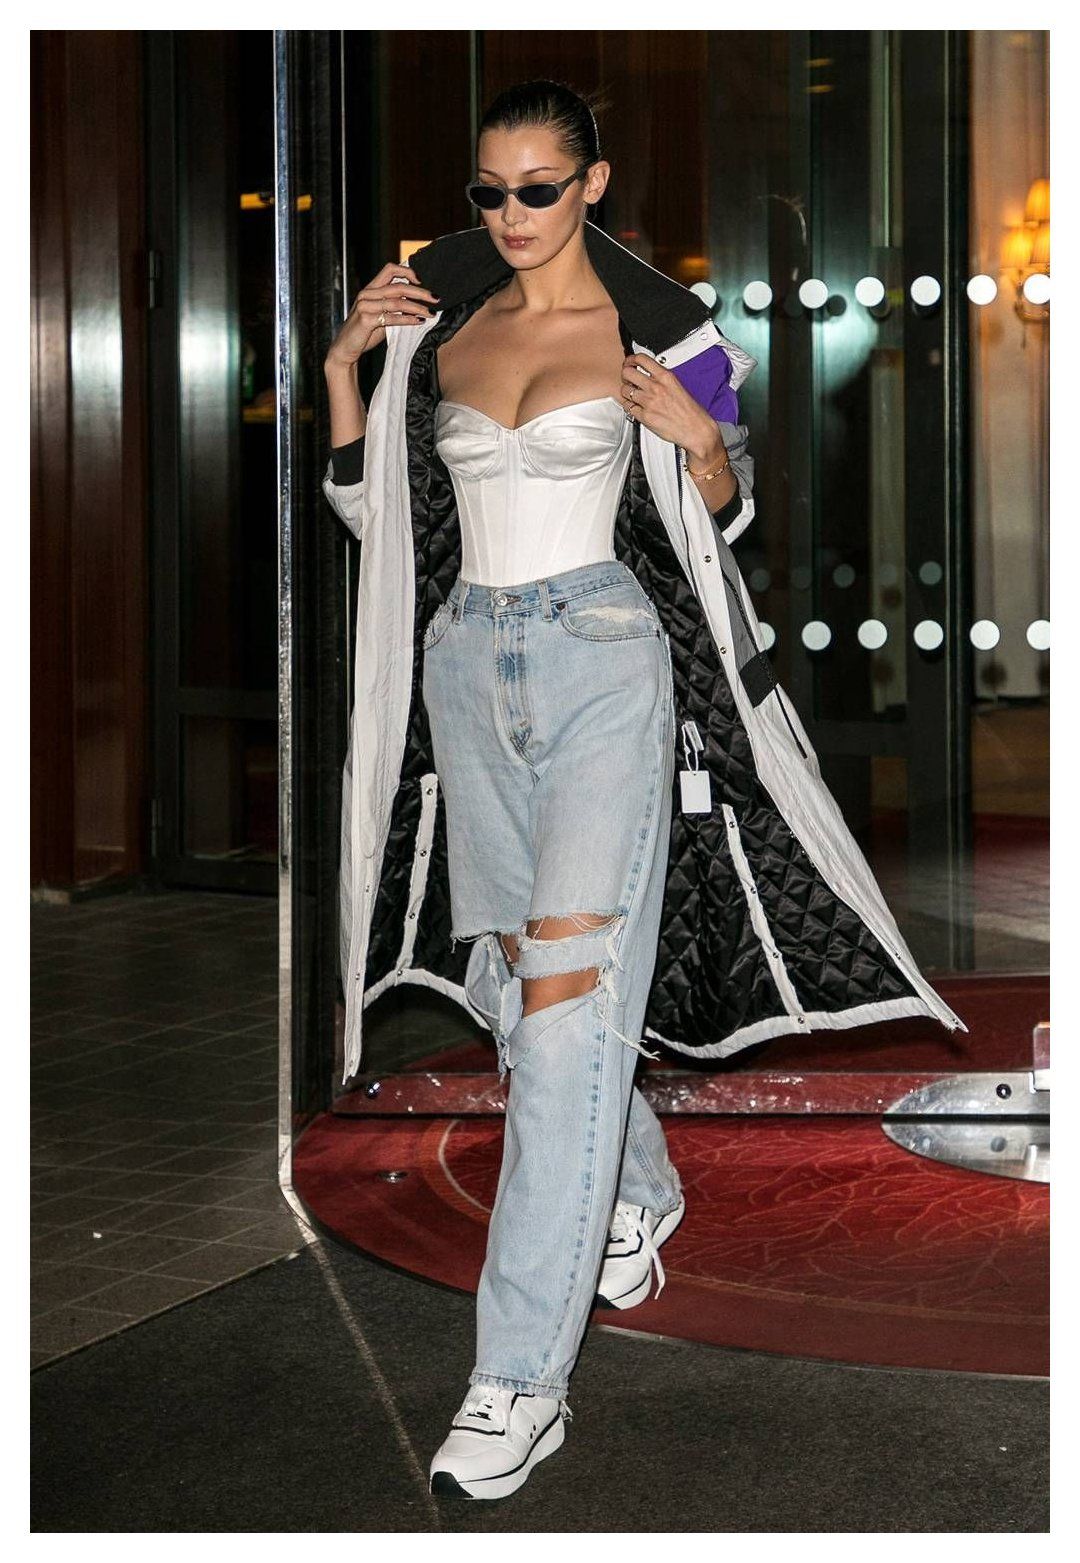 Celebs' Fav Corset and Bustier Tops For Day or Night